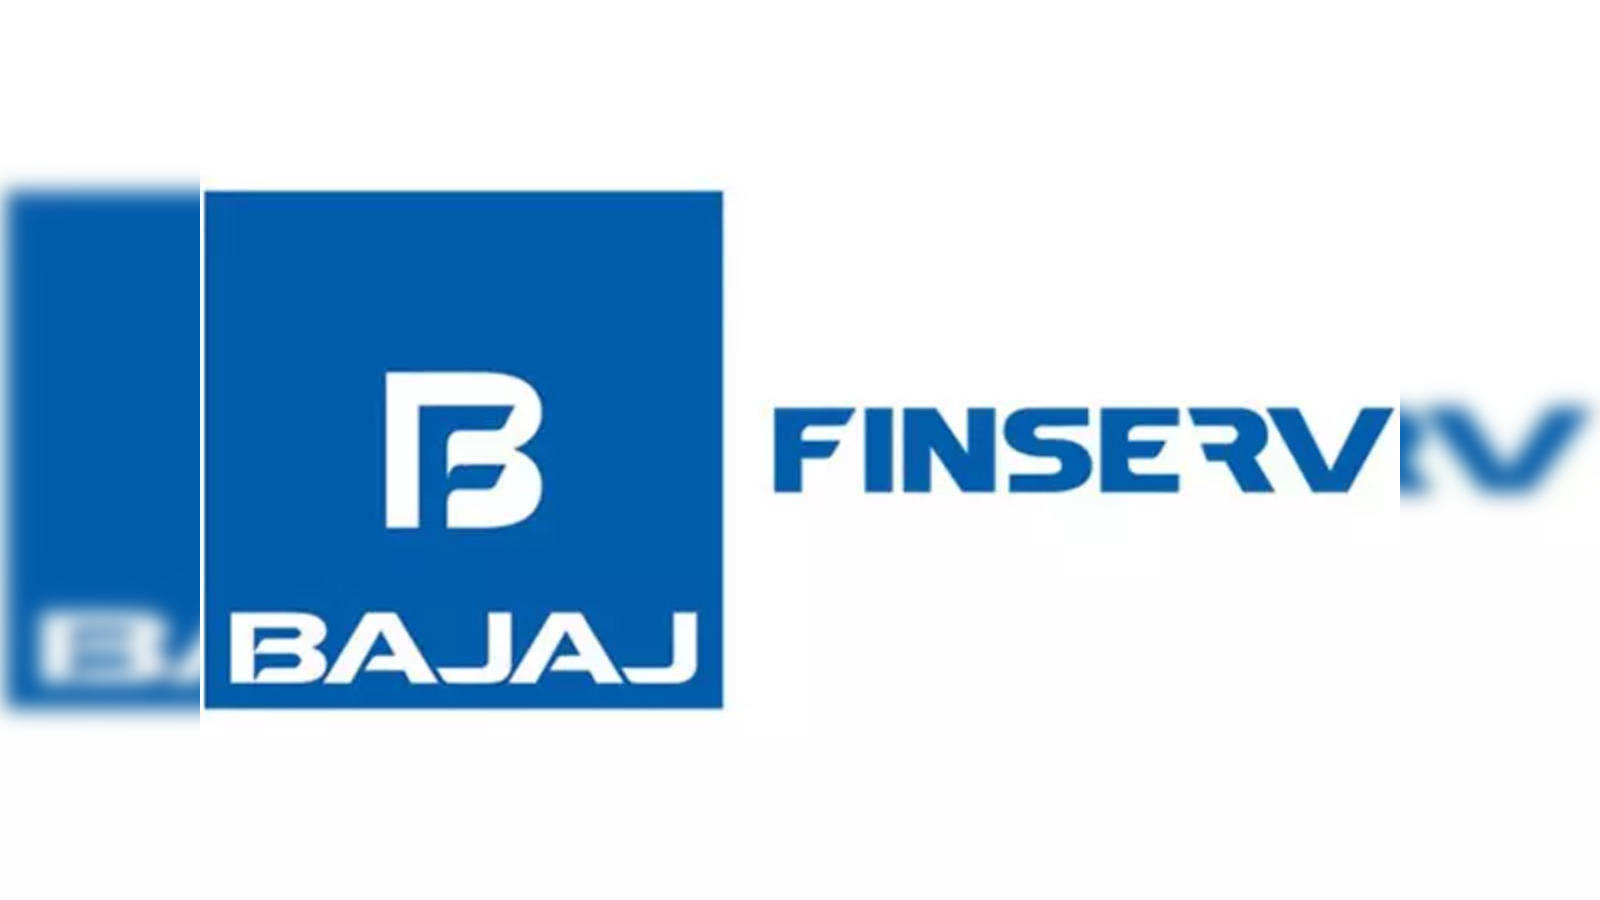 Bajaj Finserv health arm acquires Vidal Healthcare valued at Rs 325 crore -  Industry News | The Financial Express